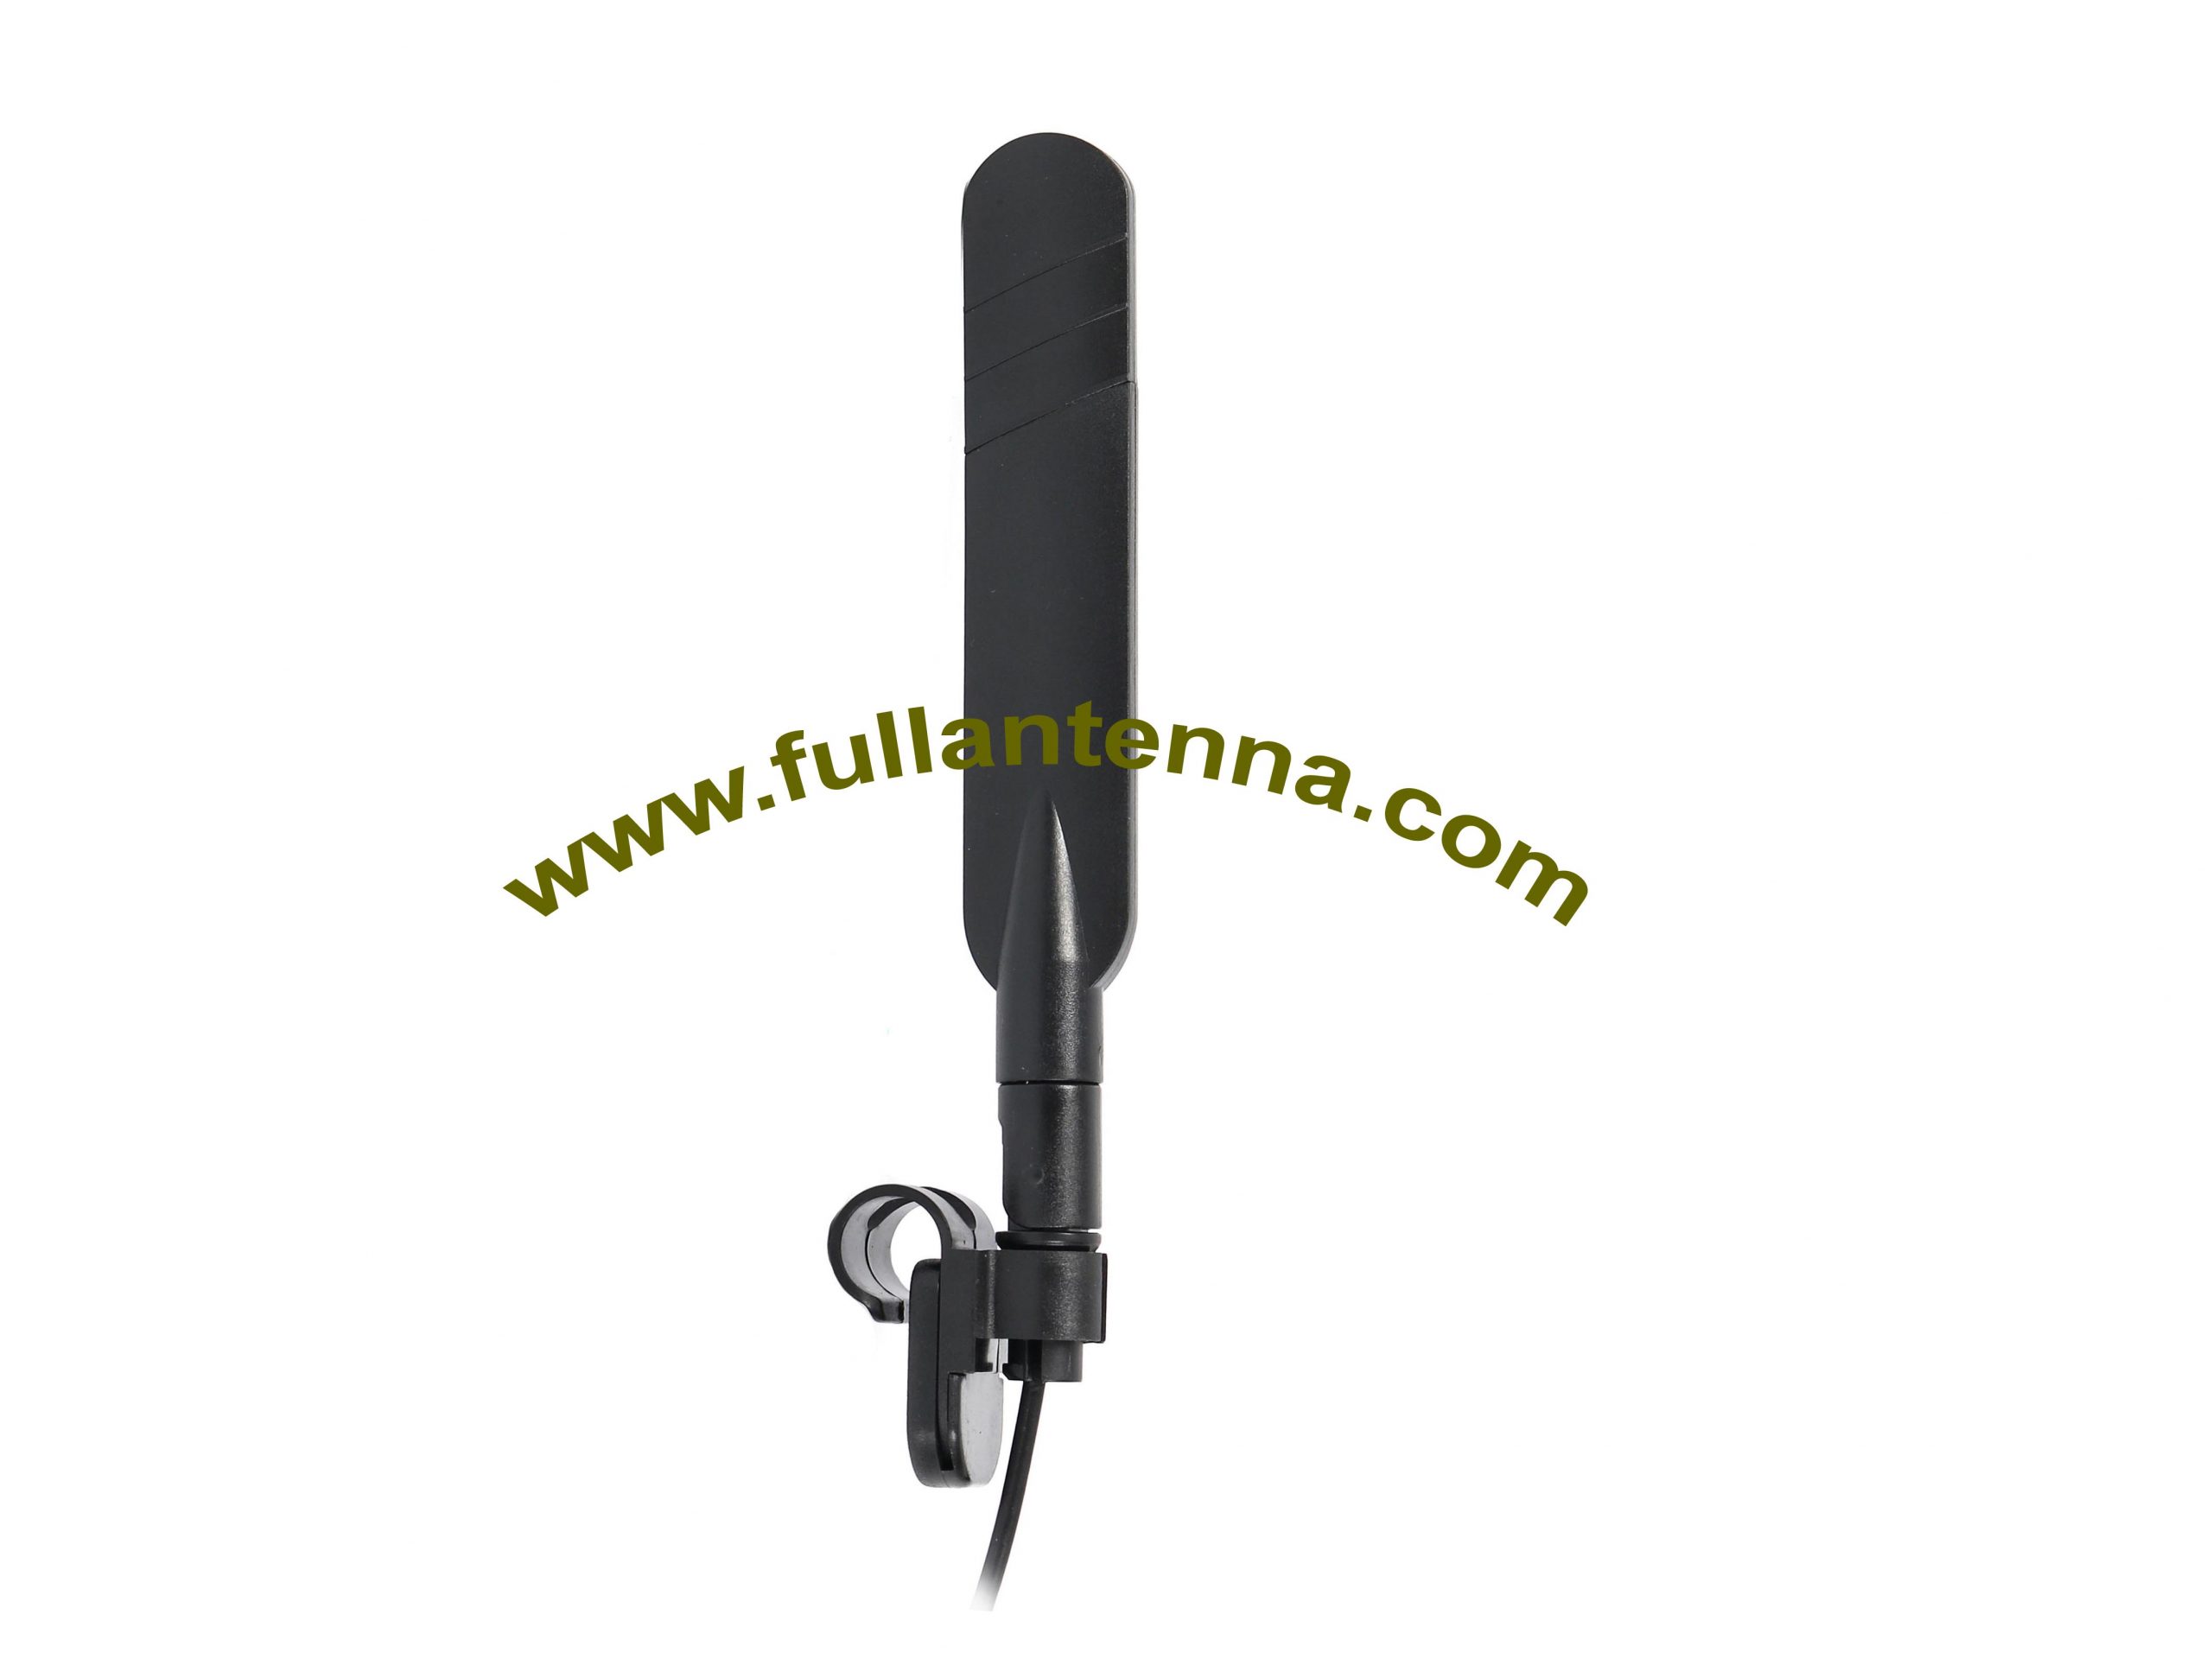 P/N:FA2400.0202Clip,WiFi/2.4G External Antenna,clip mount for computer,cable length 20cm-1meter